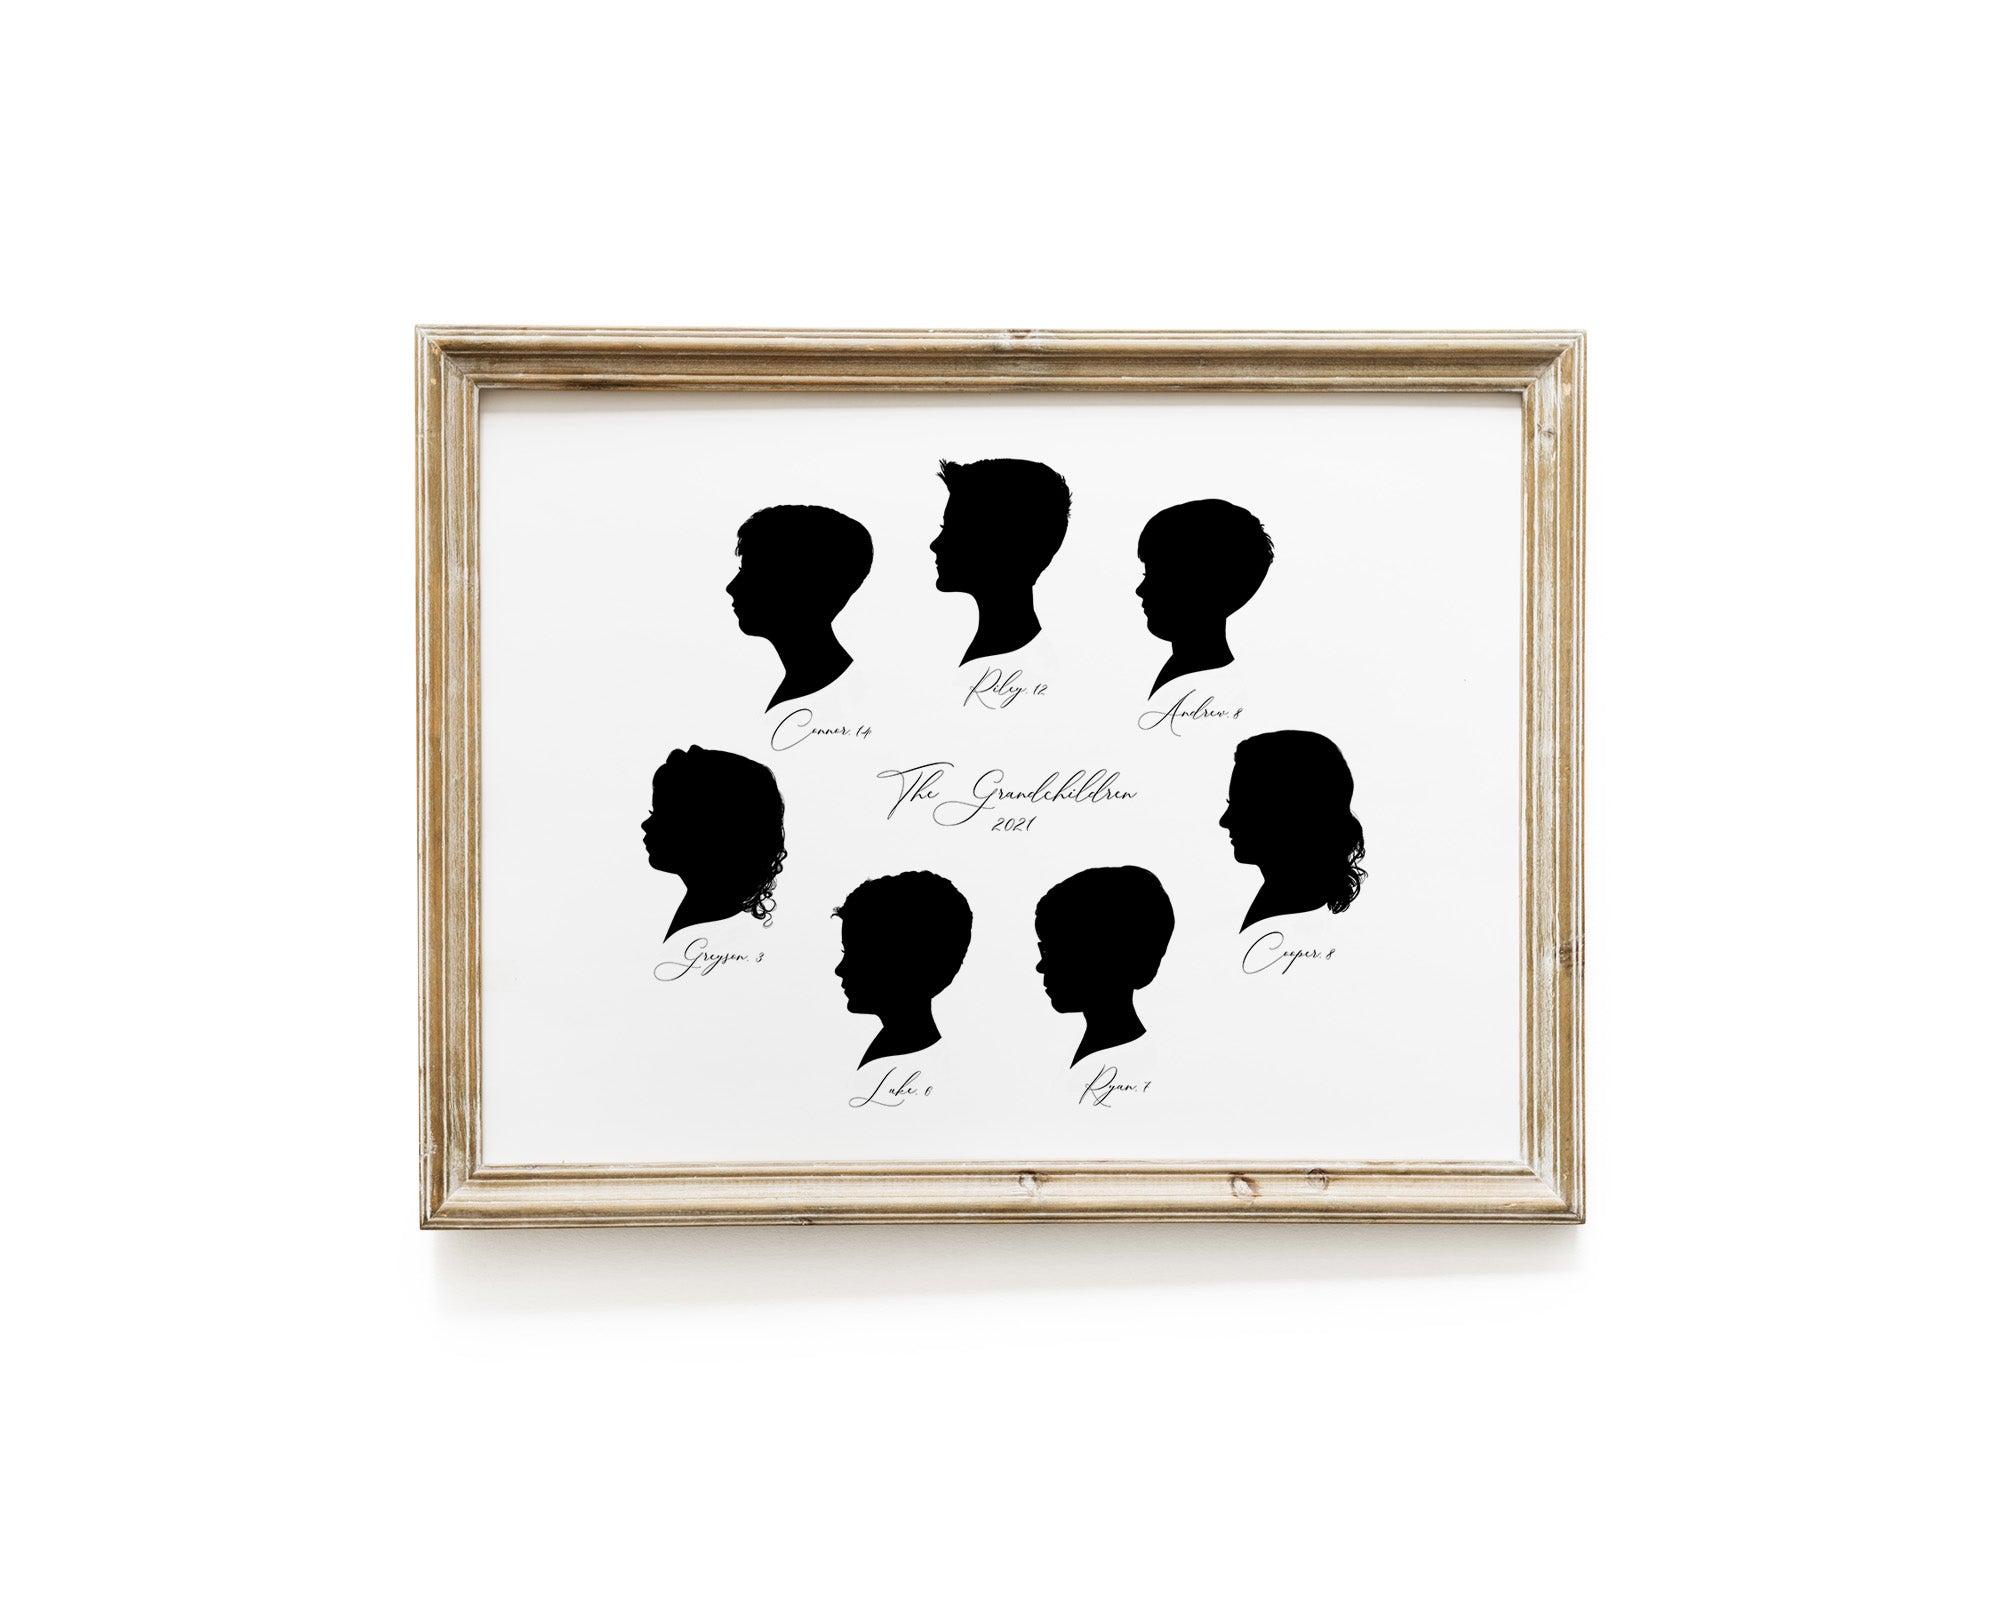 Family silhouette featuring a group of grandchildren